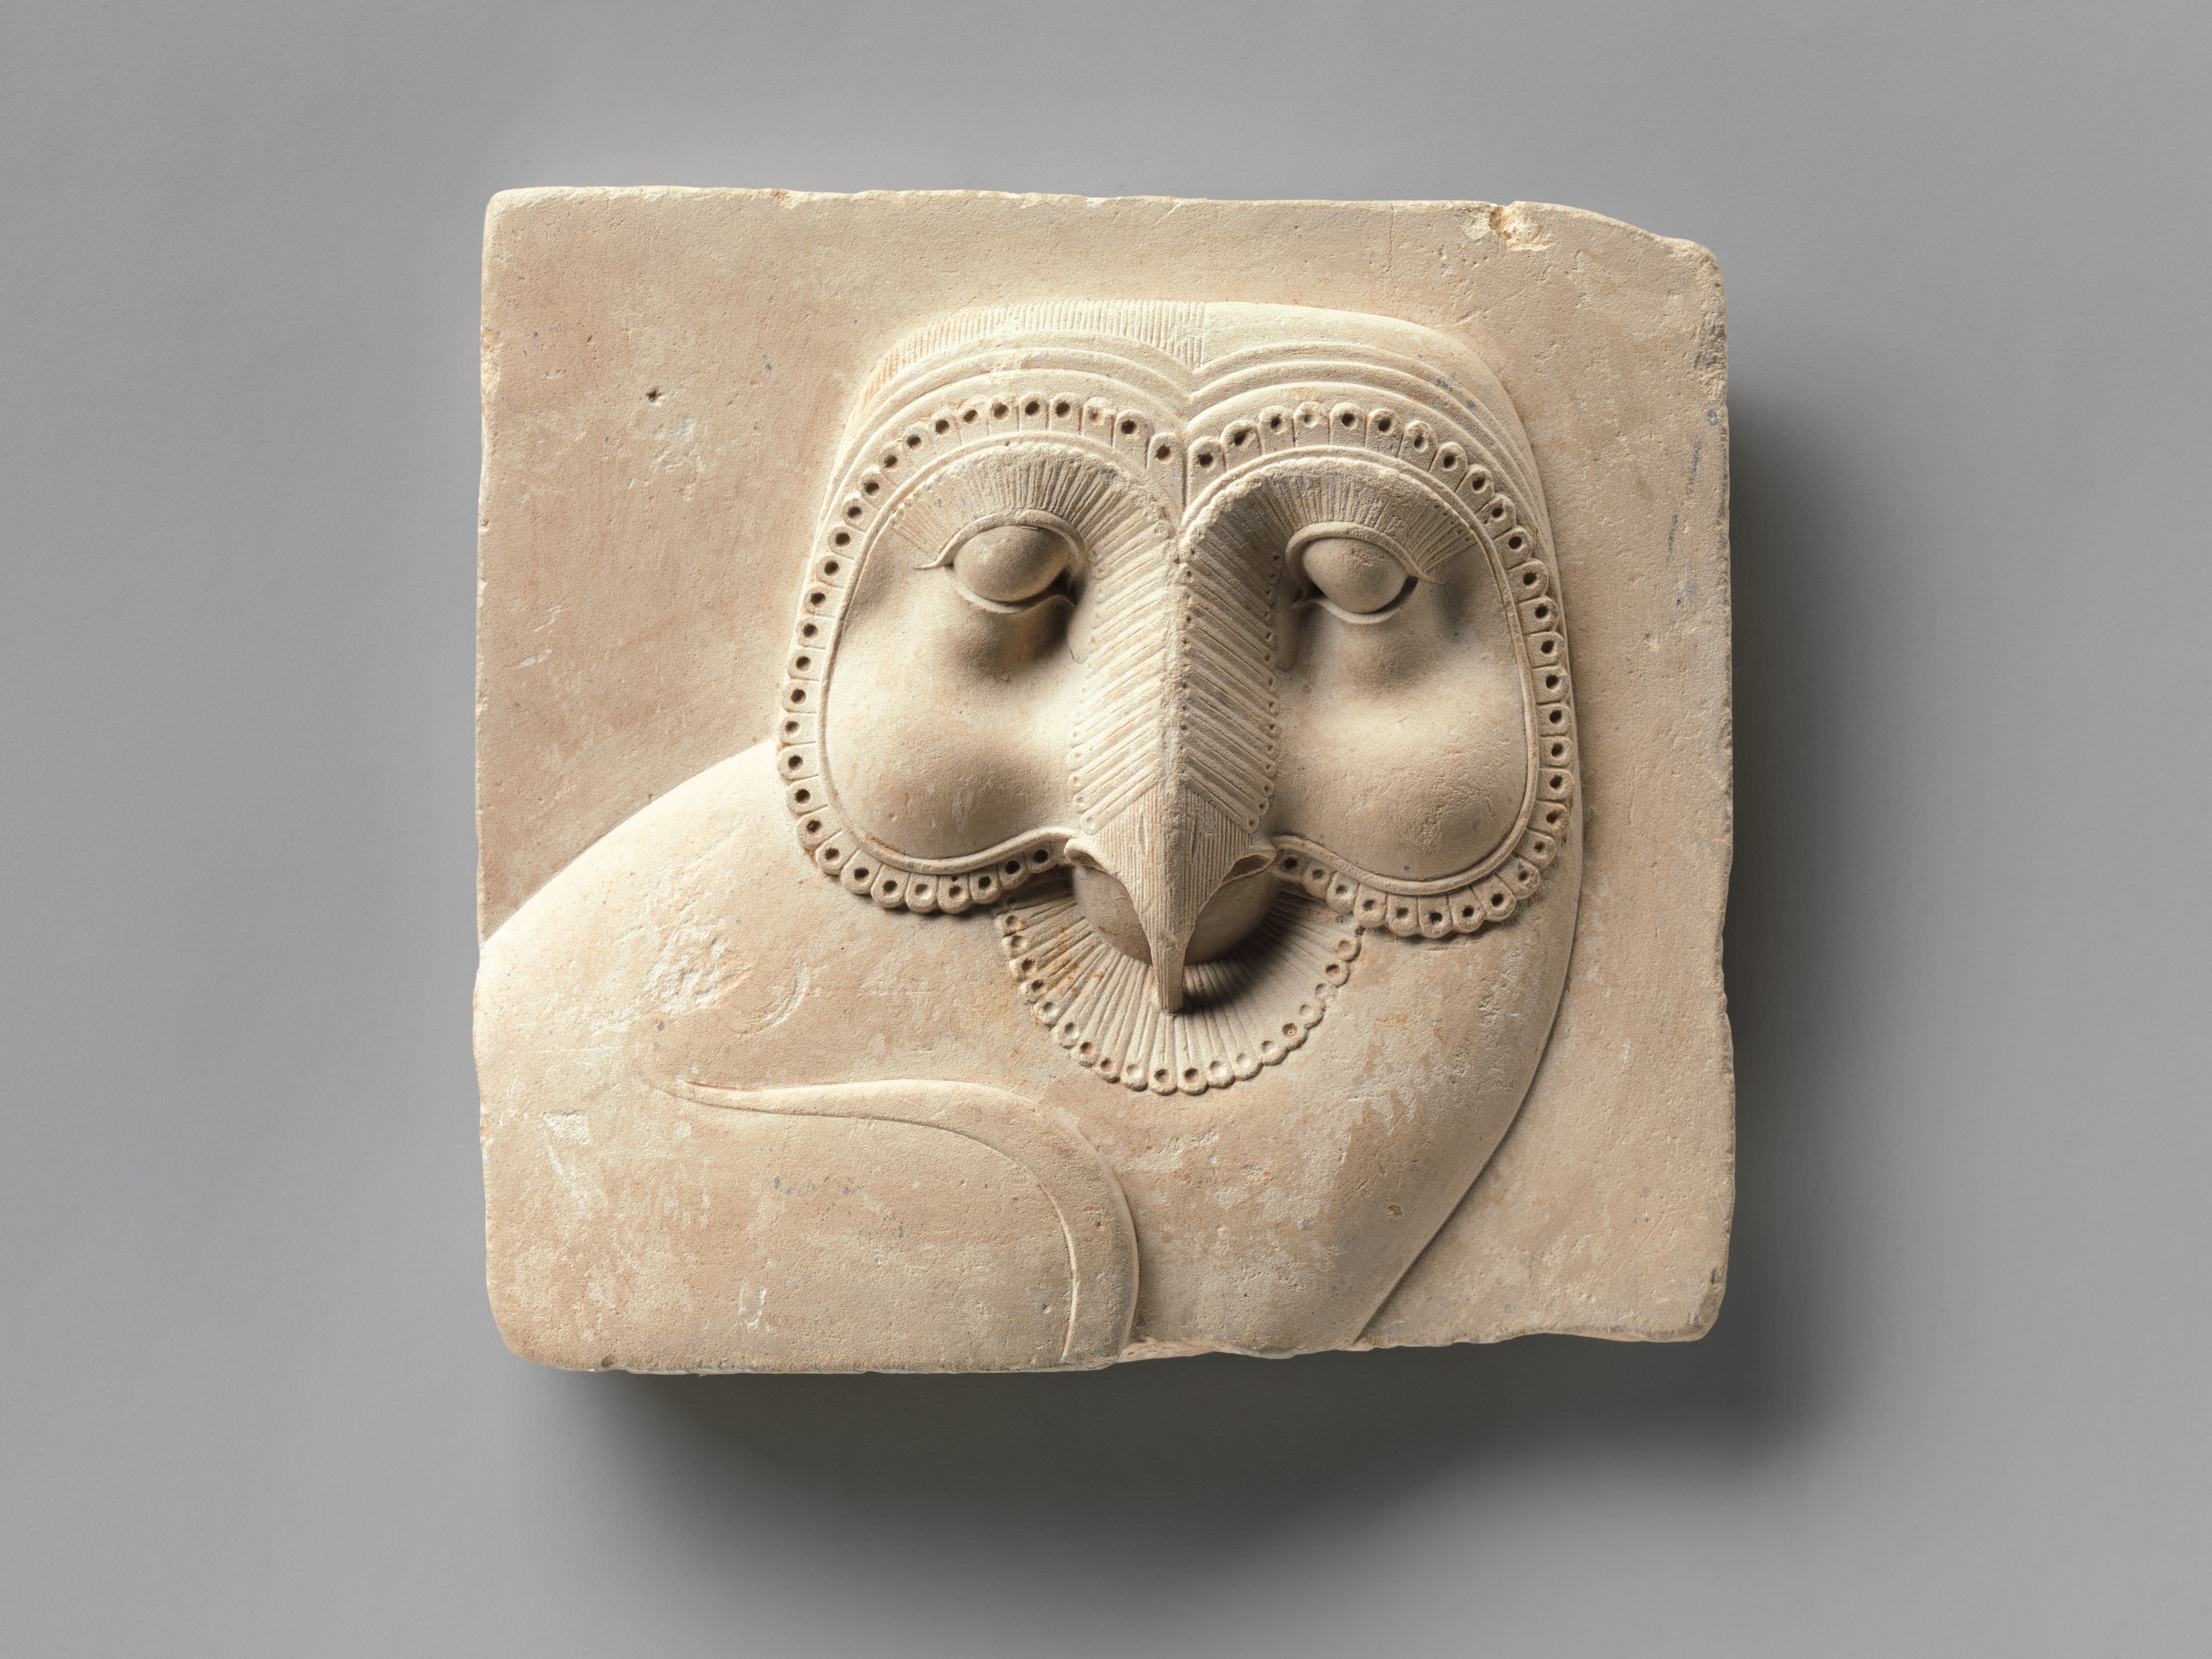 Relief plaque with face of an owl hieroglyph by Unknown Artist - 400–30 B.C.E - 10.3 x 11.1 x 2.5 cm Metropolitan Museum of Art